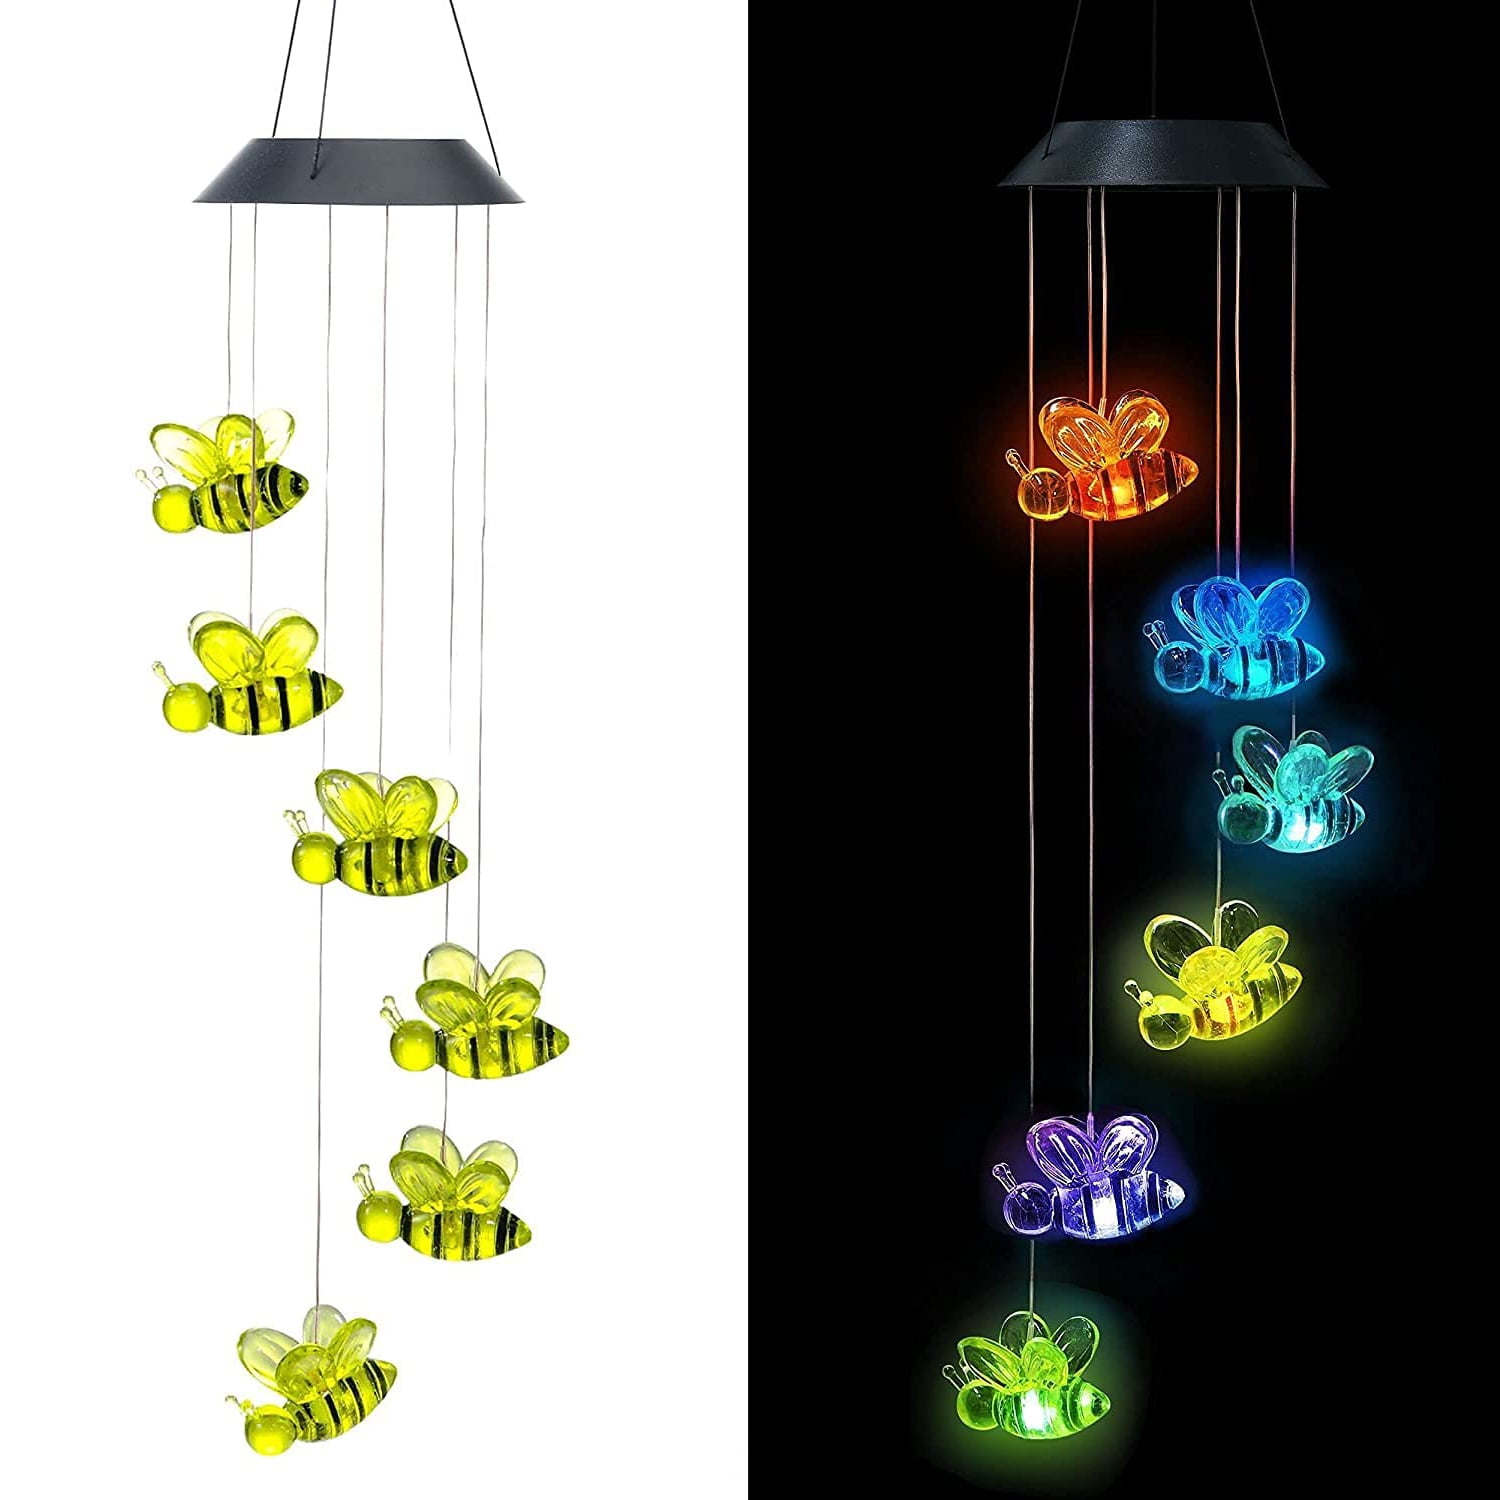 Gifts for Mom Waterproof Decorative Light with Color Changing LED Lights niboameu Solar Wind Chimes Crystal Ball Wind Chimes with Bells Romantic Décor for Garden Yard Home Wife Grandma